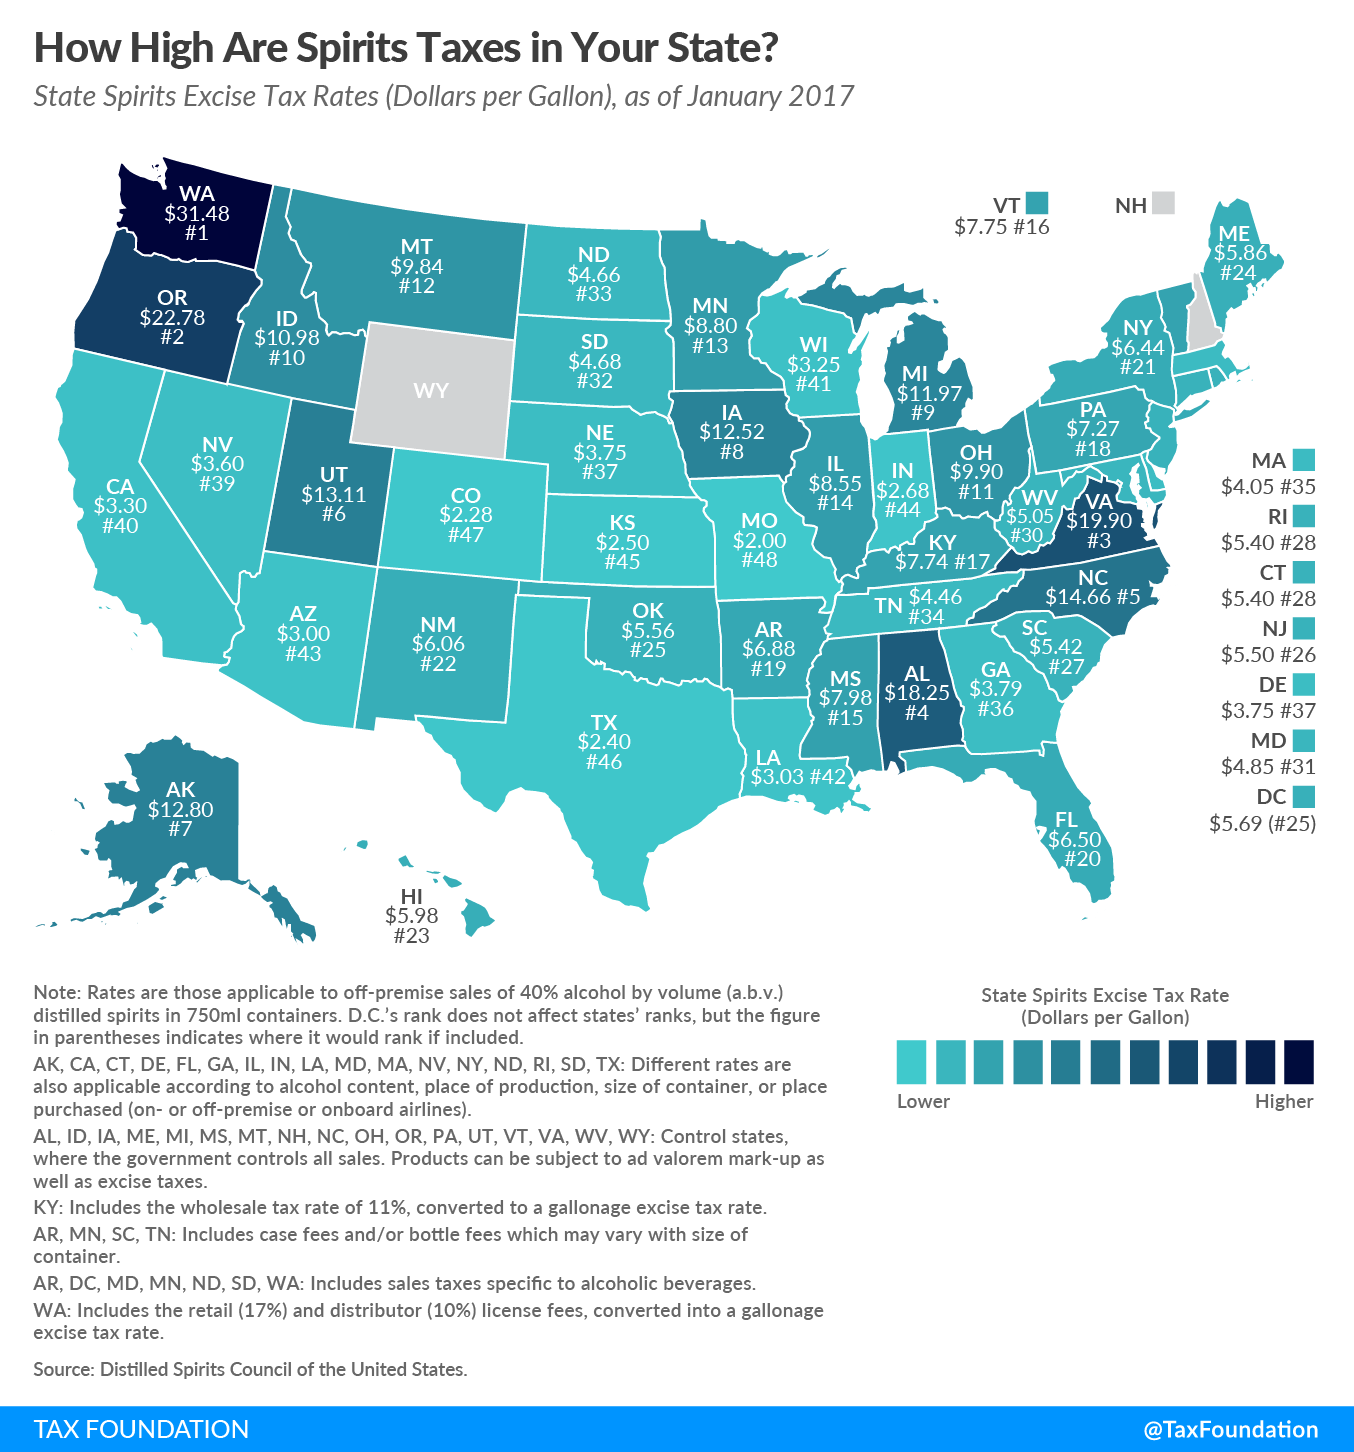 How High Are Spirits Taxes in Your State?